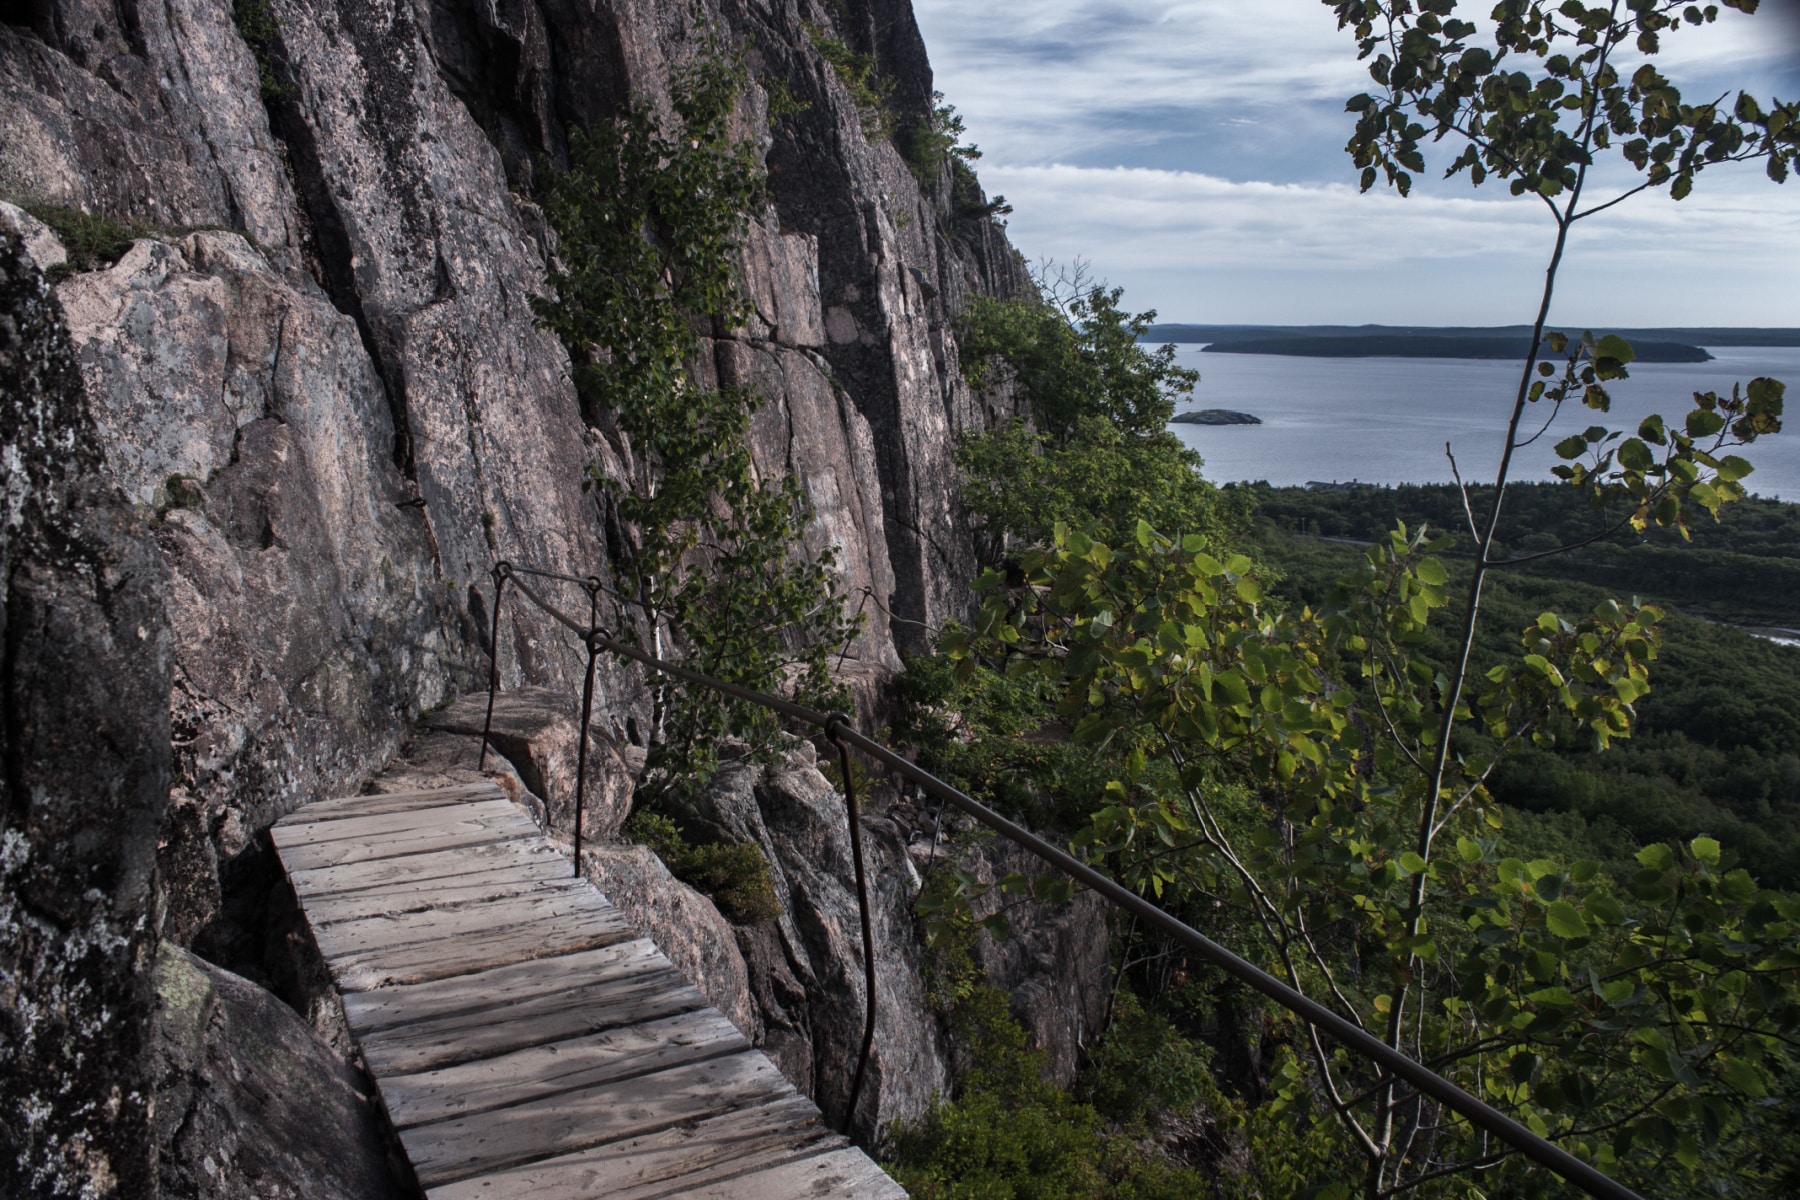 Wooden bridge over steep drop on the Precipice Trail at Acadia National Park with sheer rock wall in the foreground and bay views in the distance.